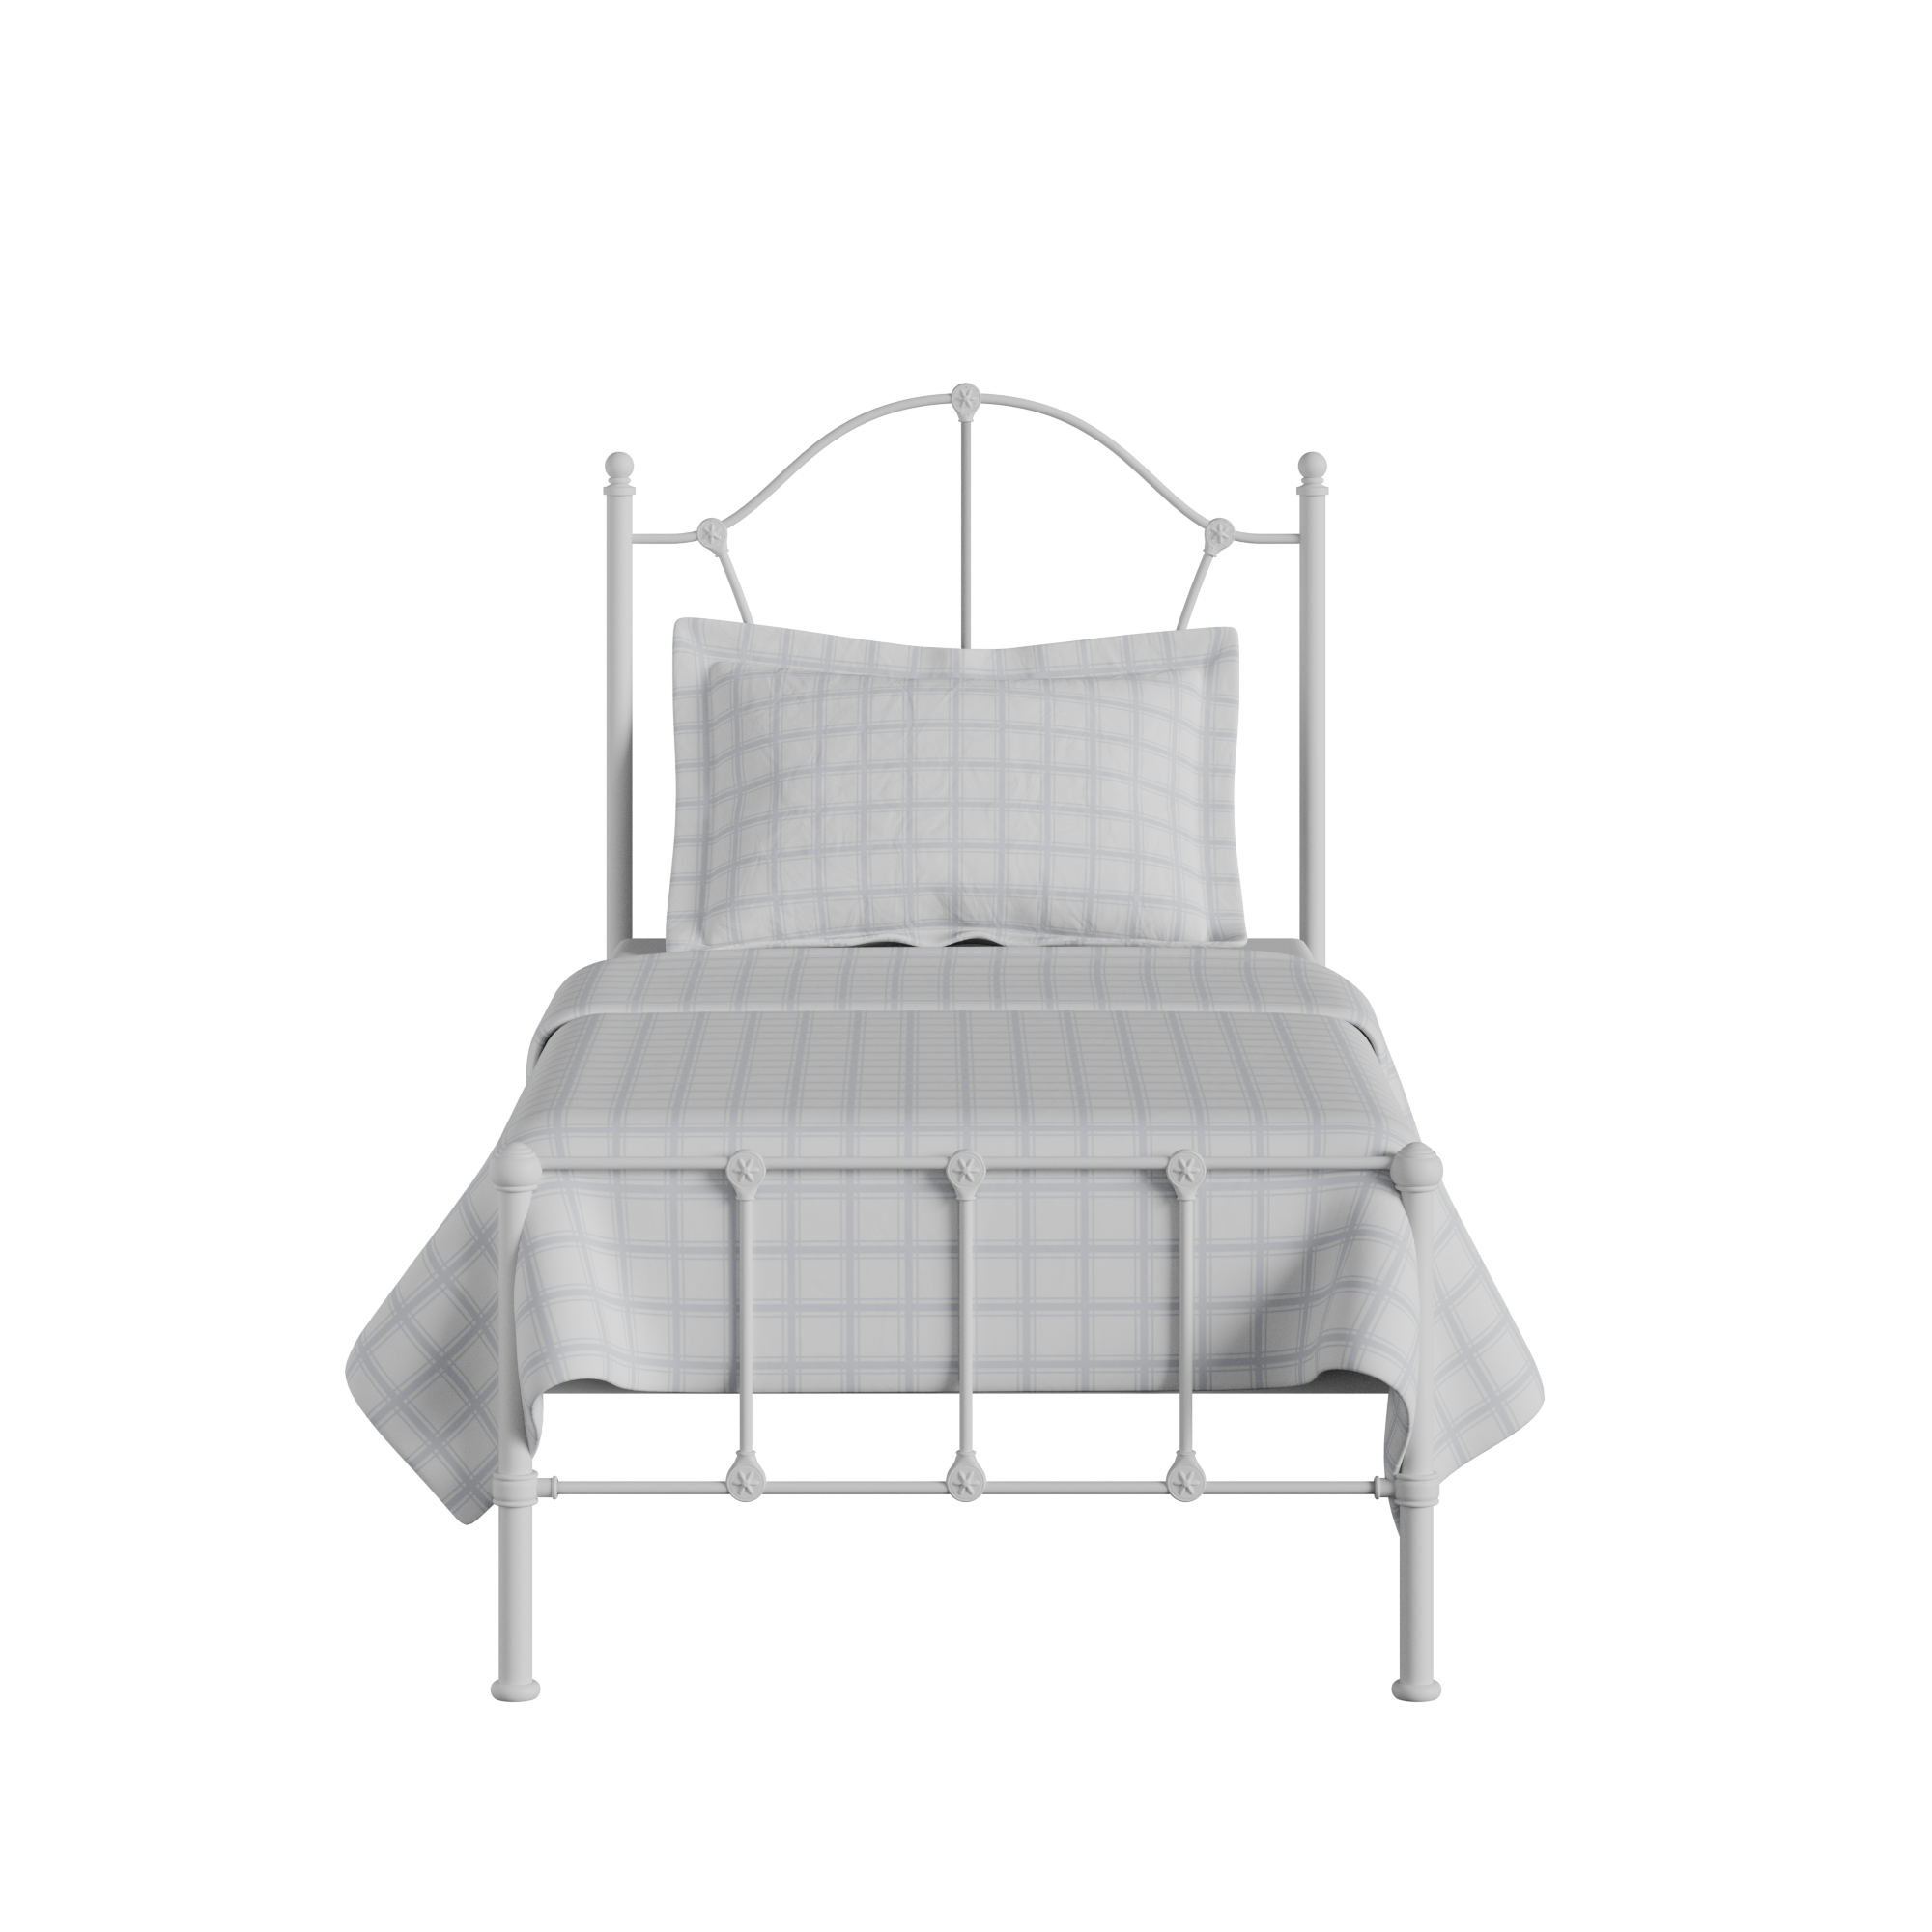 Claudia iron/metal single bed in white